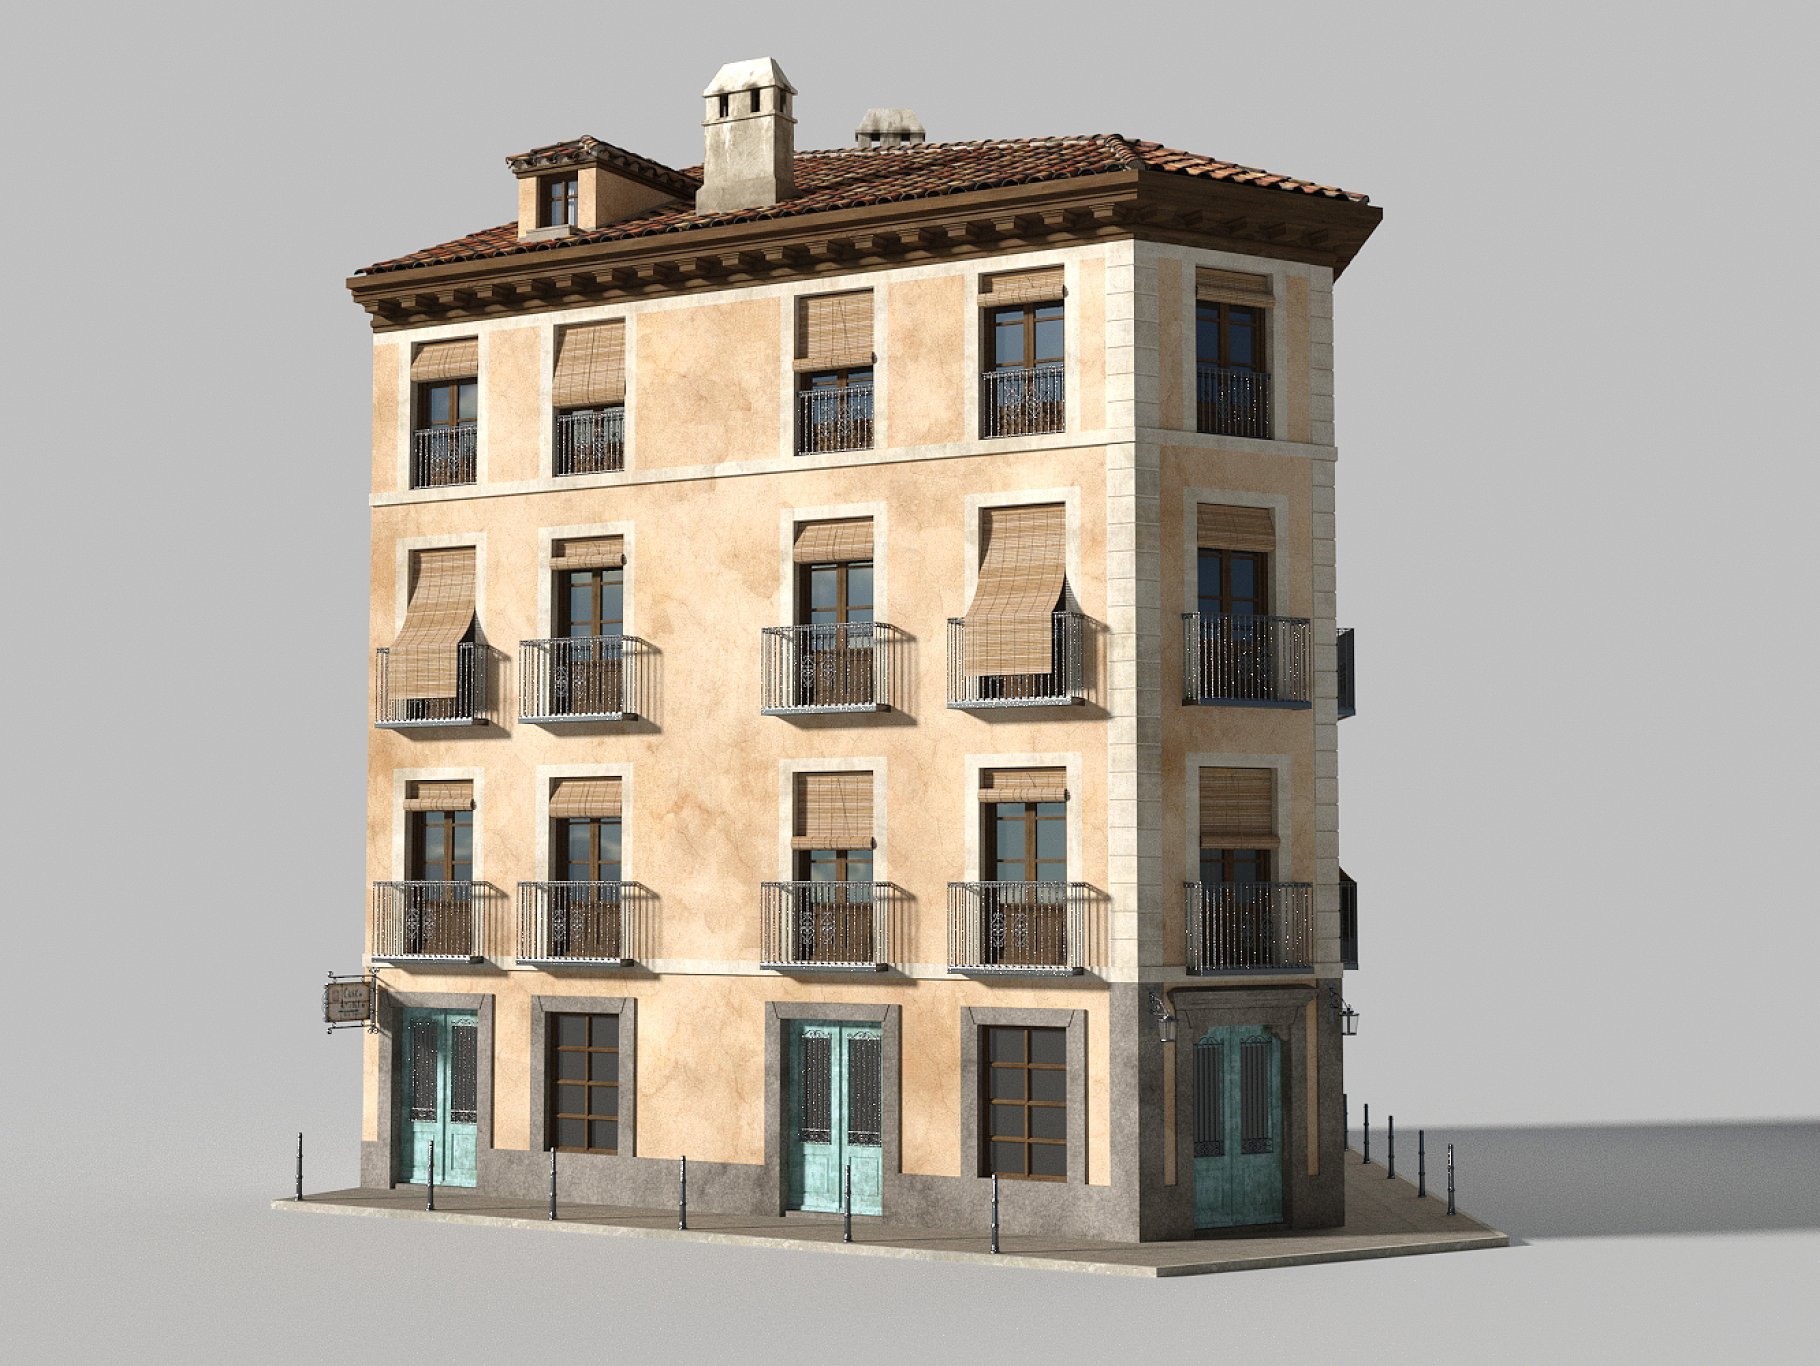 Illustrations with old spanish house.